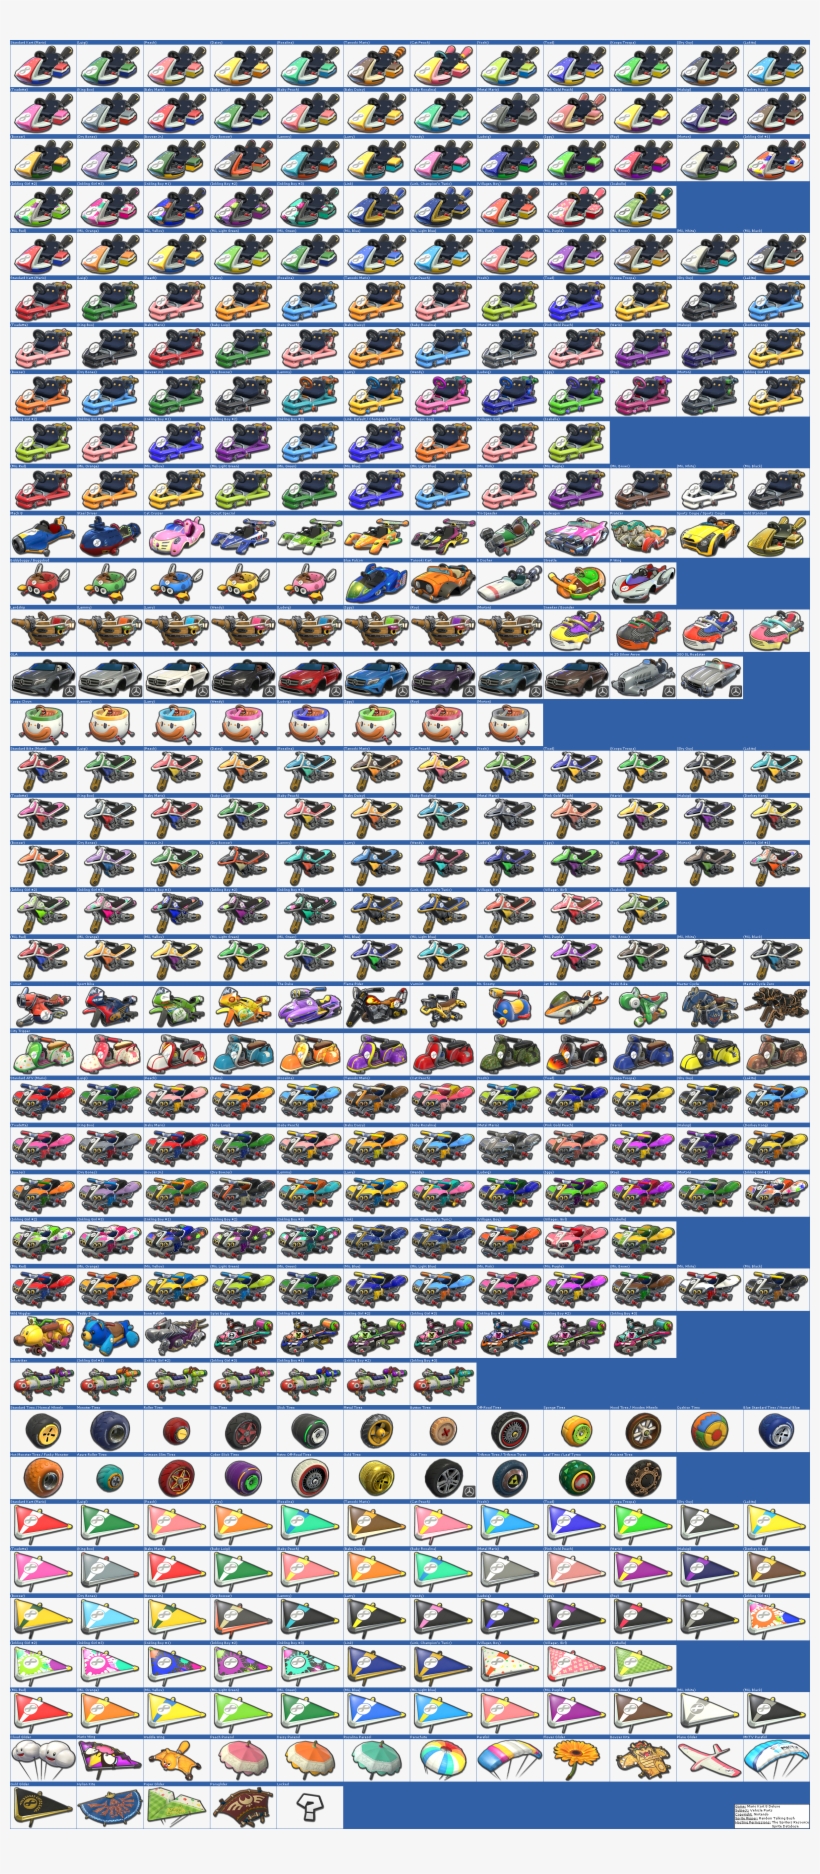 Click For Full Sized Image Vehicle Parts - Mario Kart 8 Deluxe Spirters, transparent png #1419555